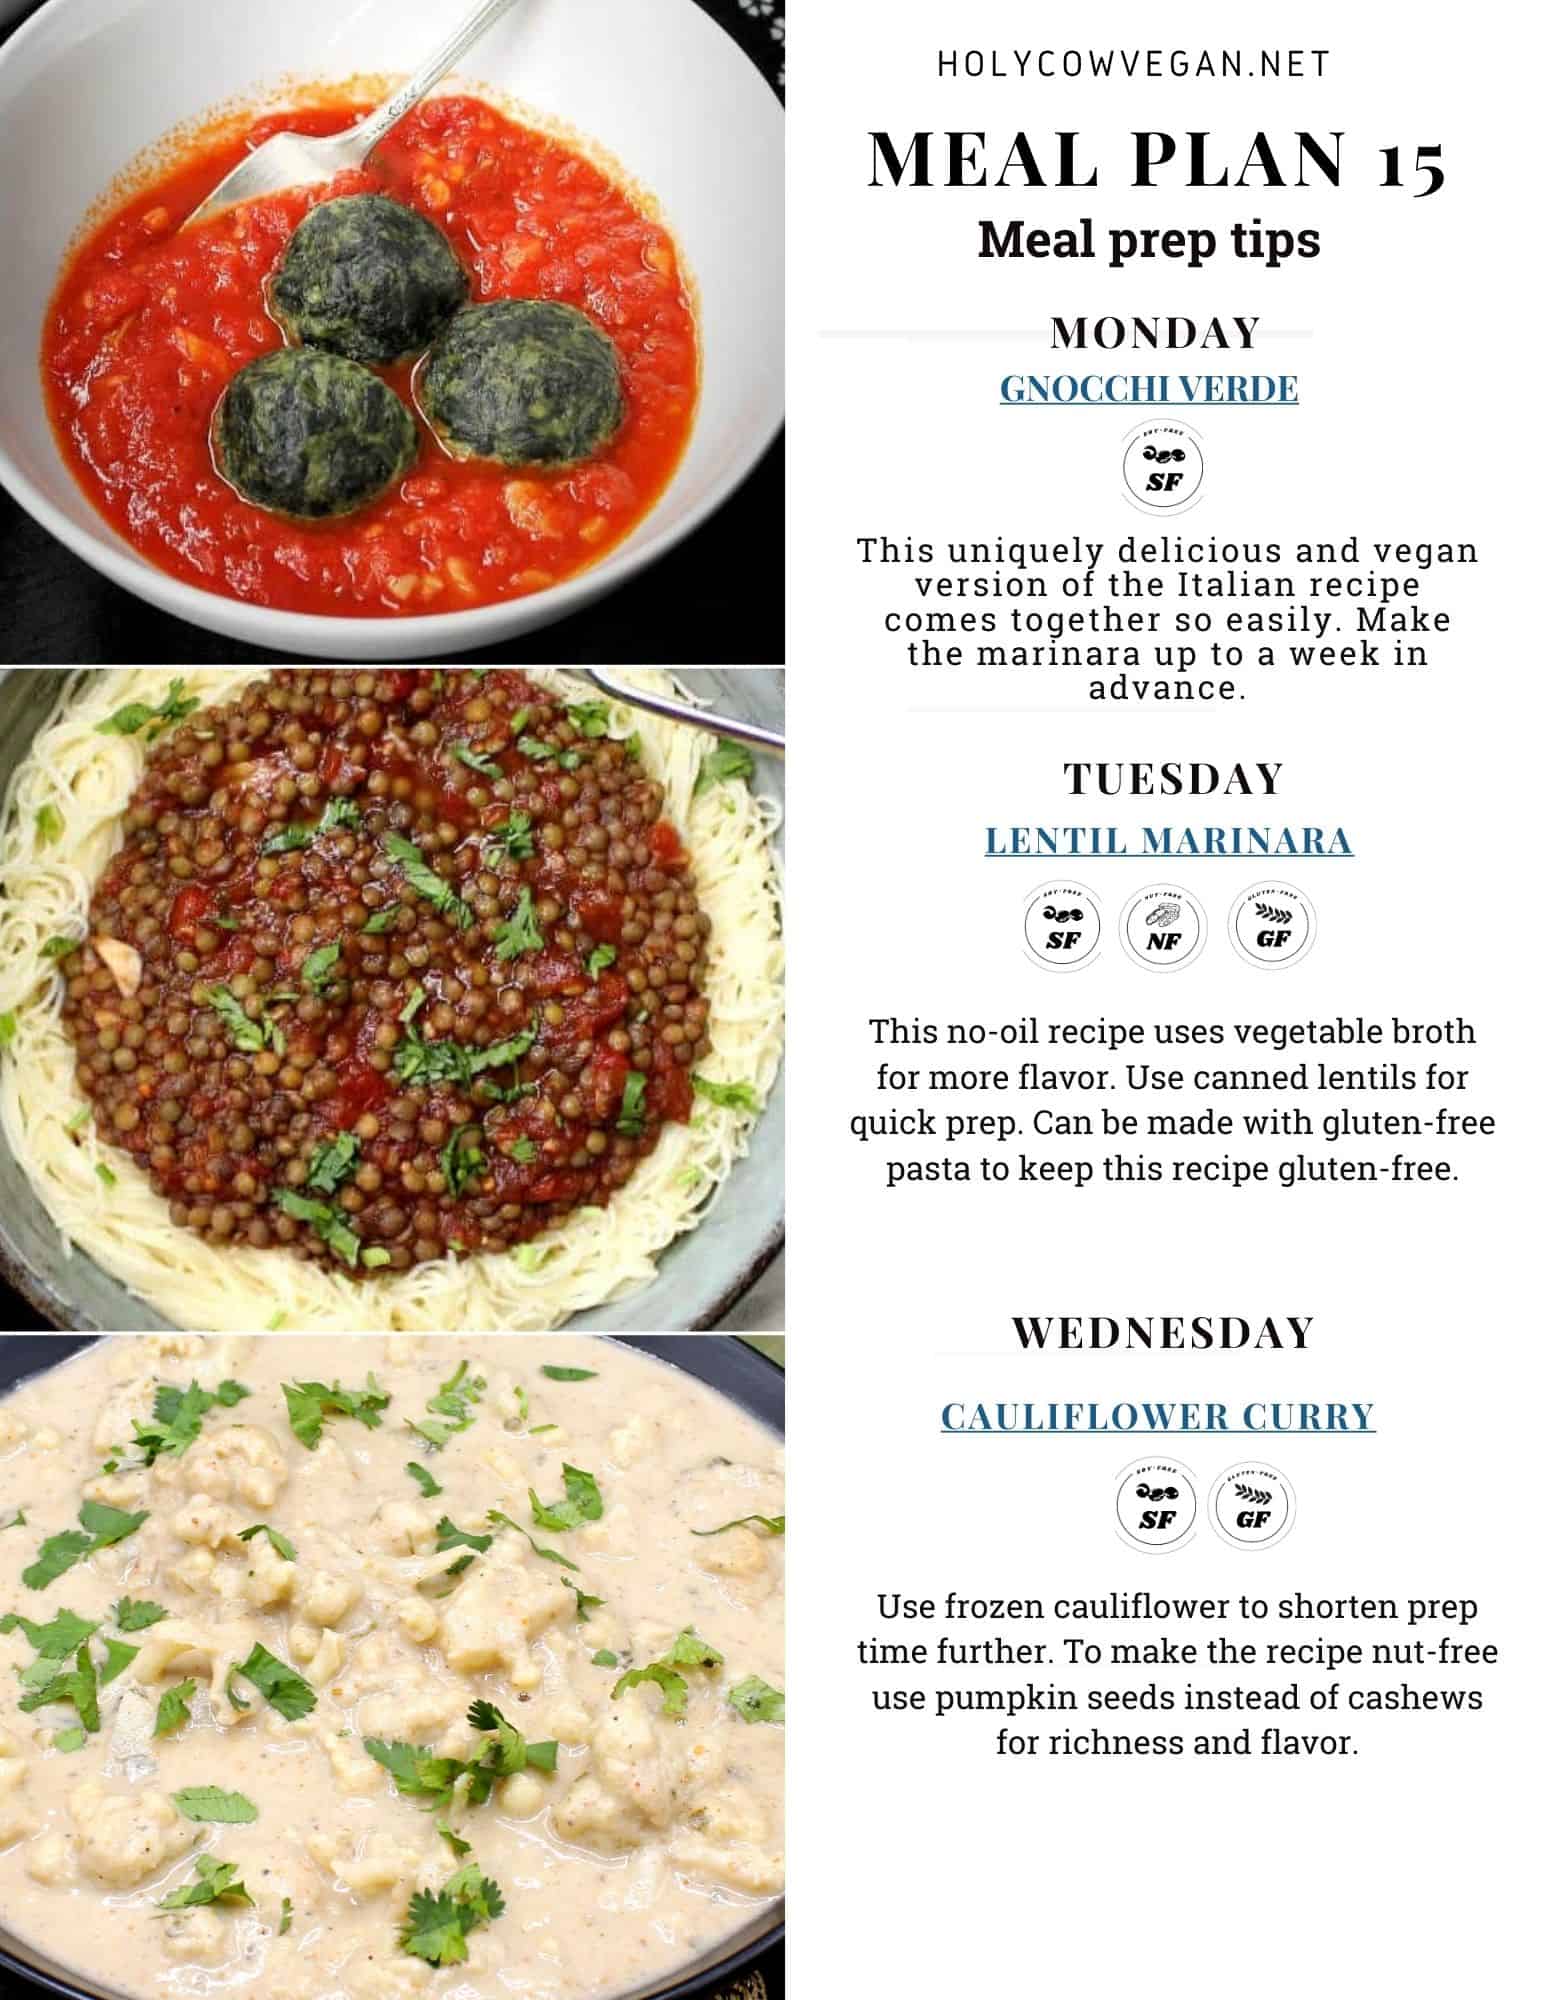 Weekly vegan meal plan 15 shopping list and meal prep instructions with images of vegan dinners, instructions and shopping list.